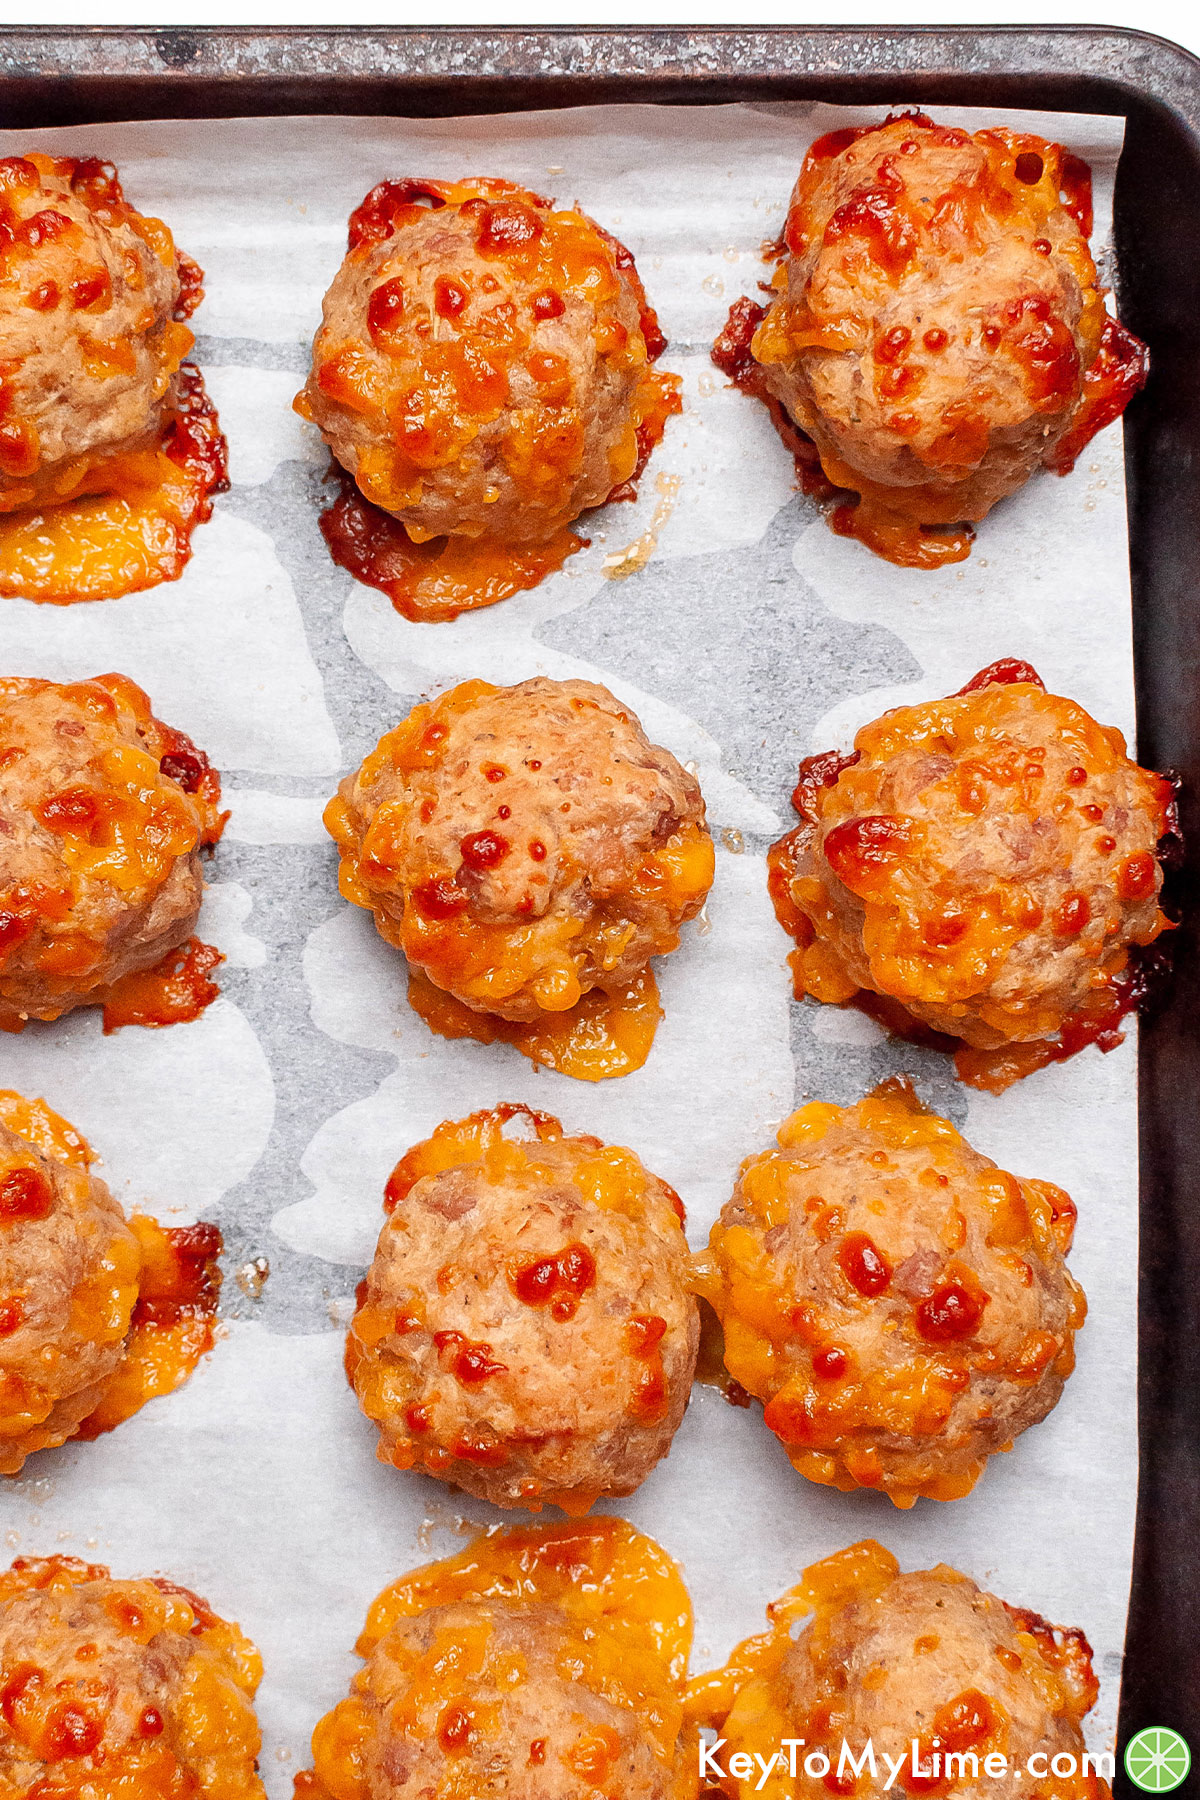 Sausage balls on a baking sheet fresh out of the oven.